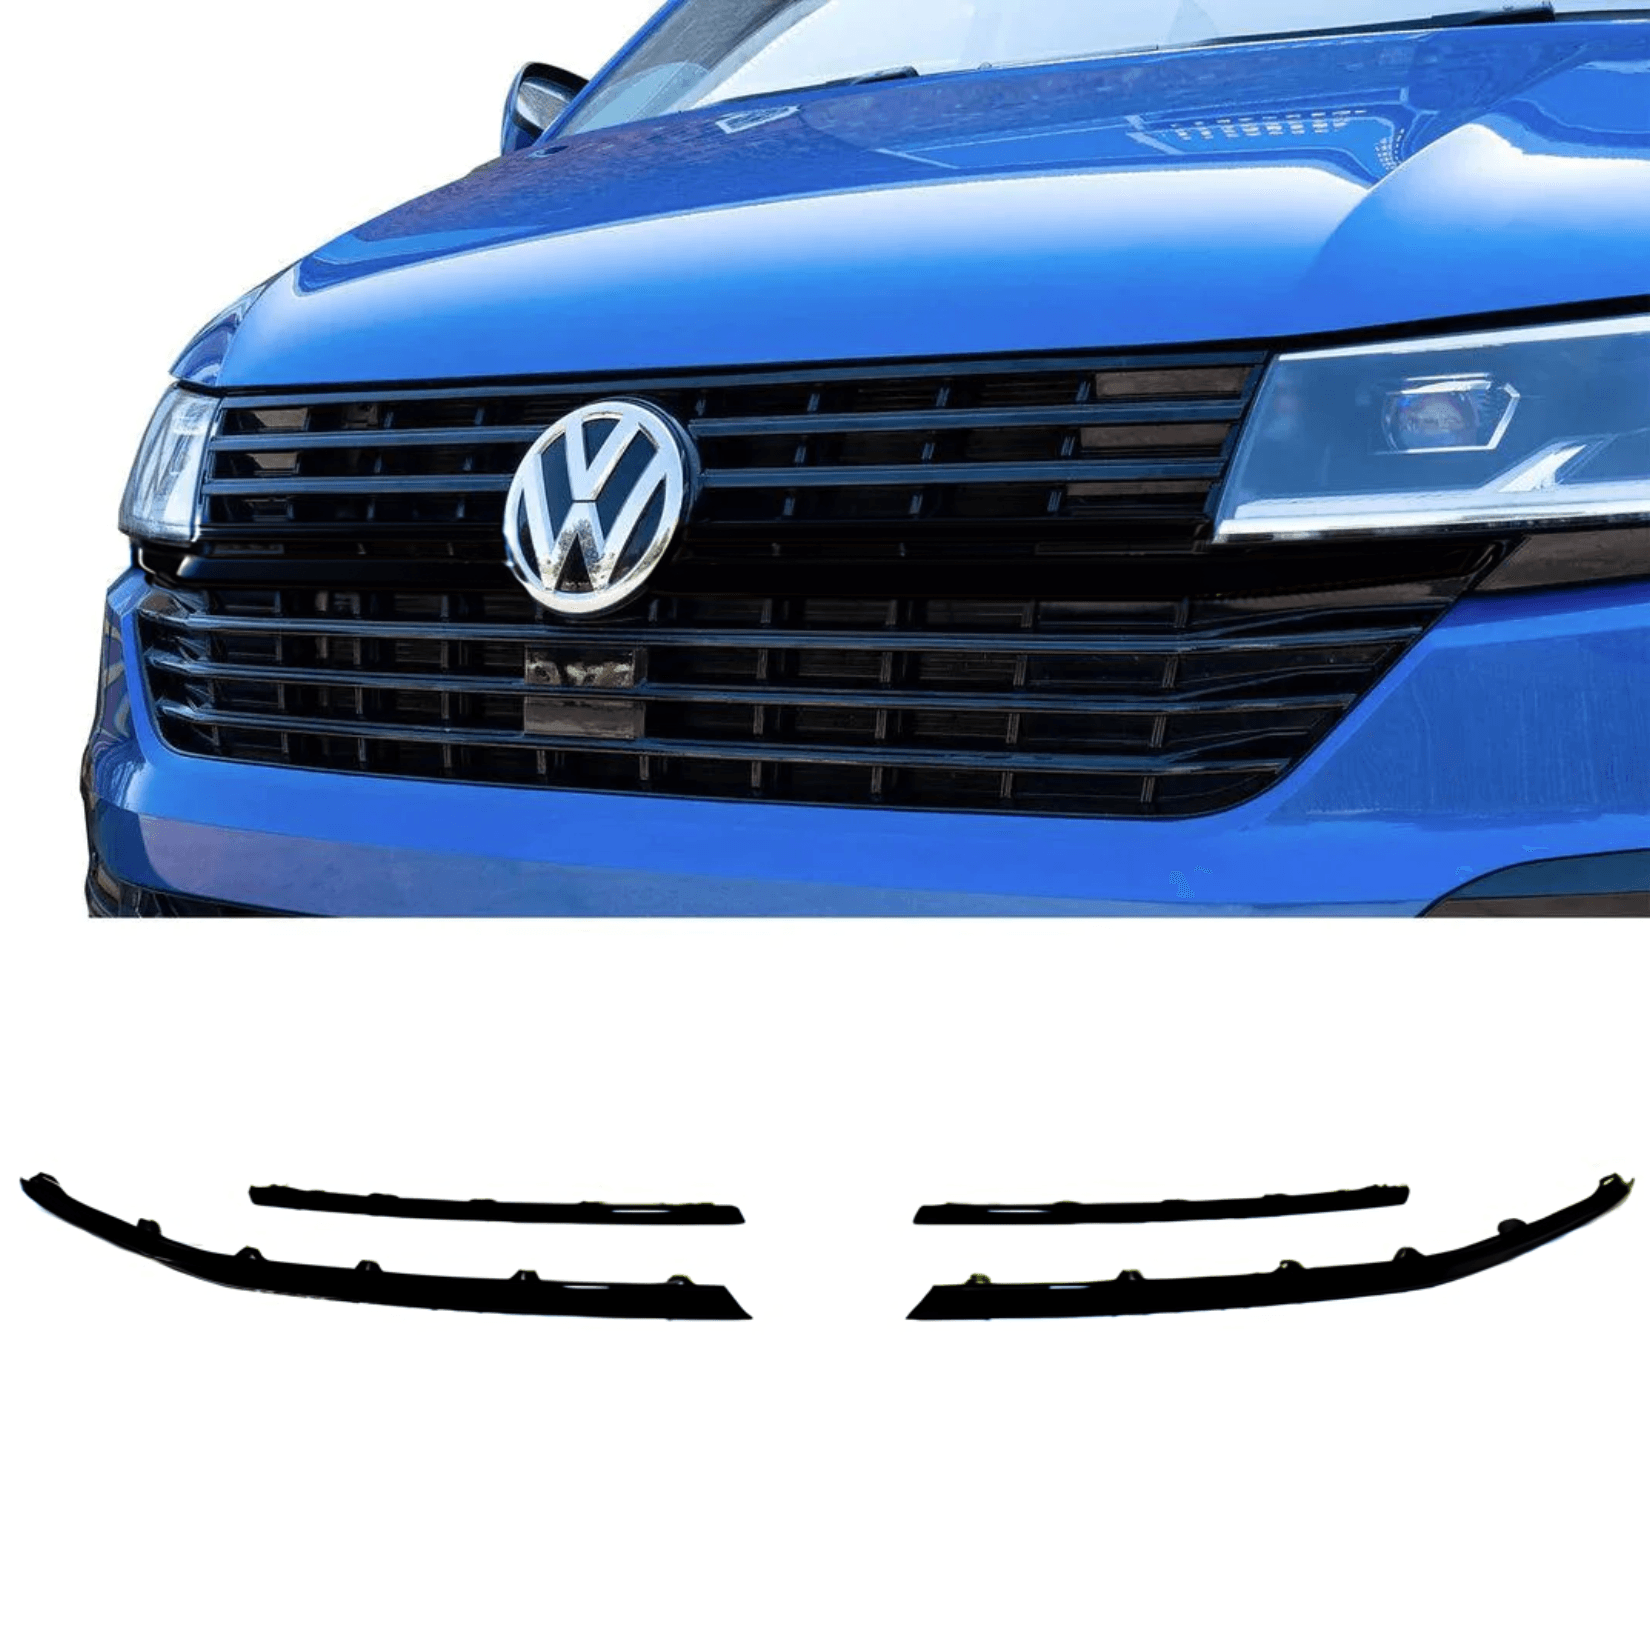 VW T6.1 TRANSPORTER FRONT RADIATOR BADGED GRILLE UPPER LOWER CLIP IN TRIM CHOOSE COLOUR - Storm Xccessories